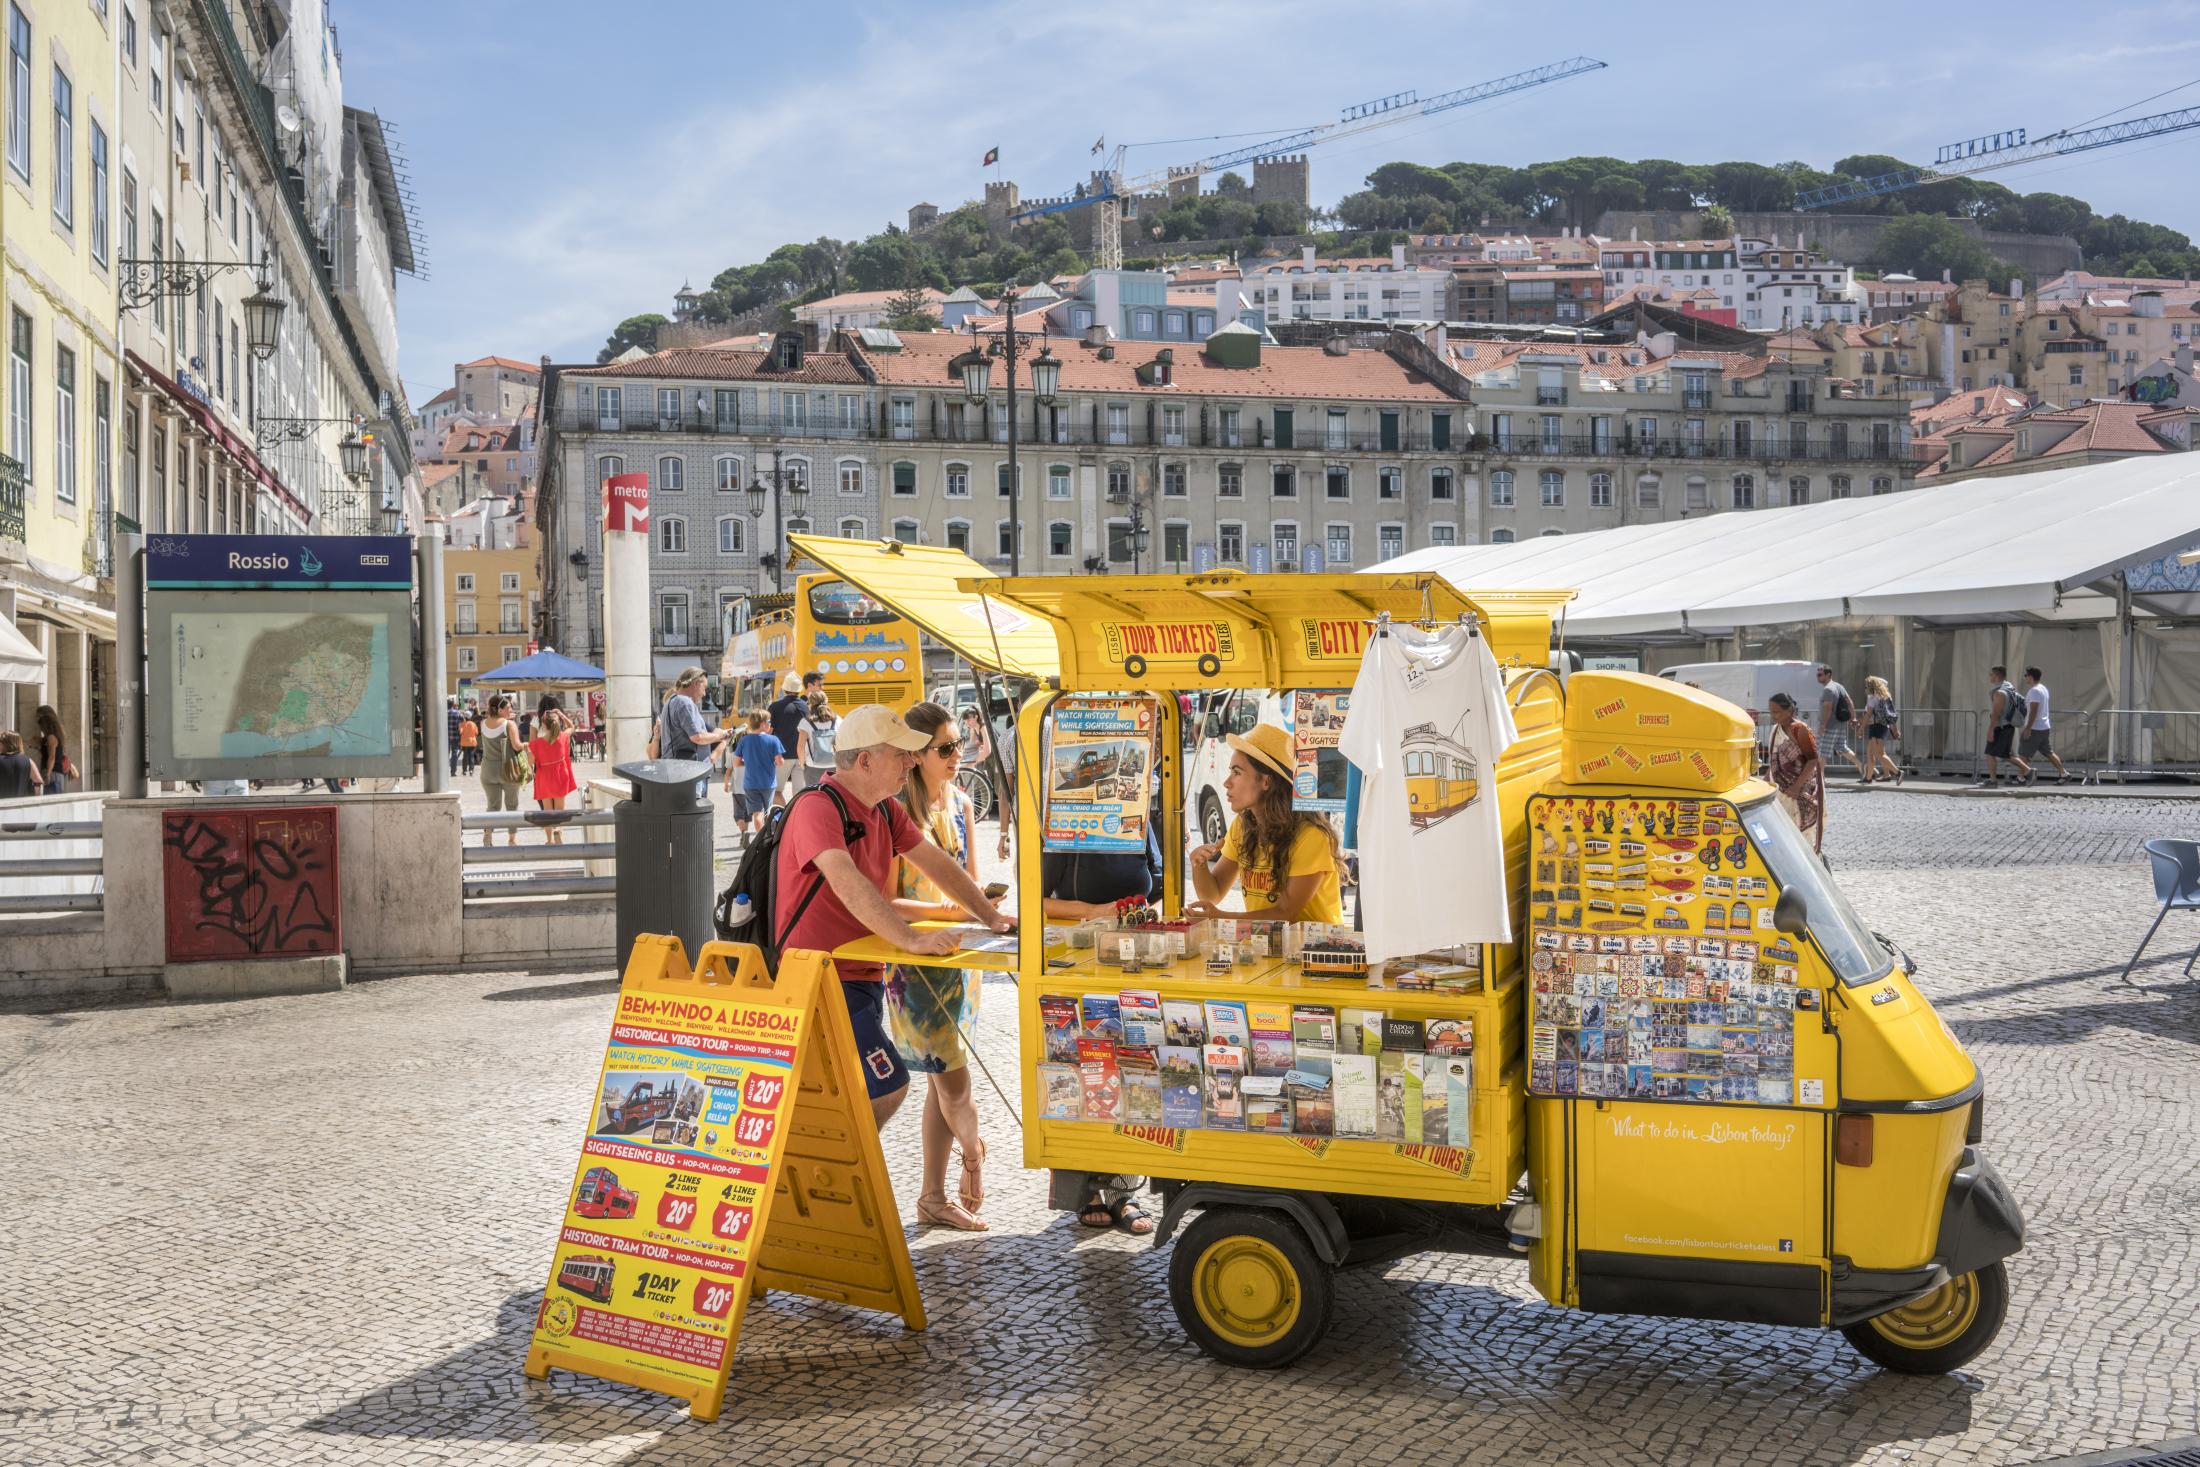 Lisbon - Tour tickets vendor in the Rossio part of Lisbon historic...